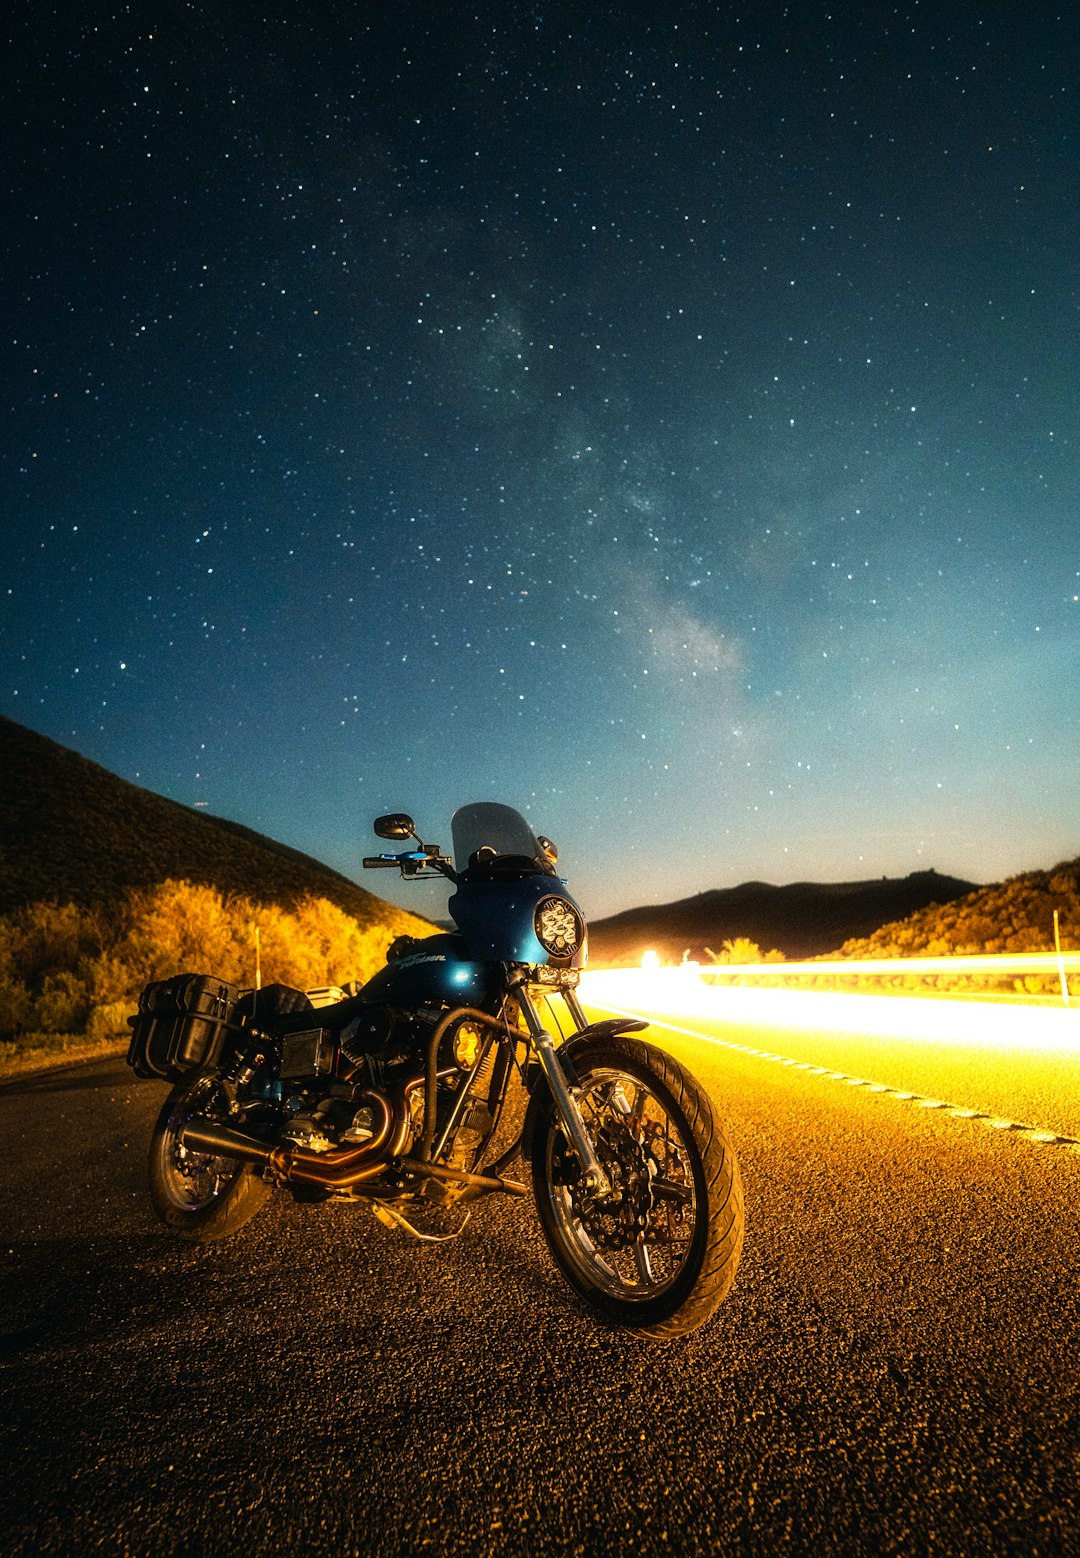 black motorcycle on road during night time